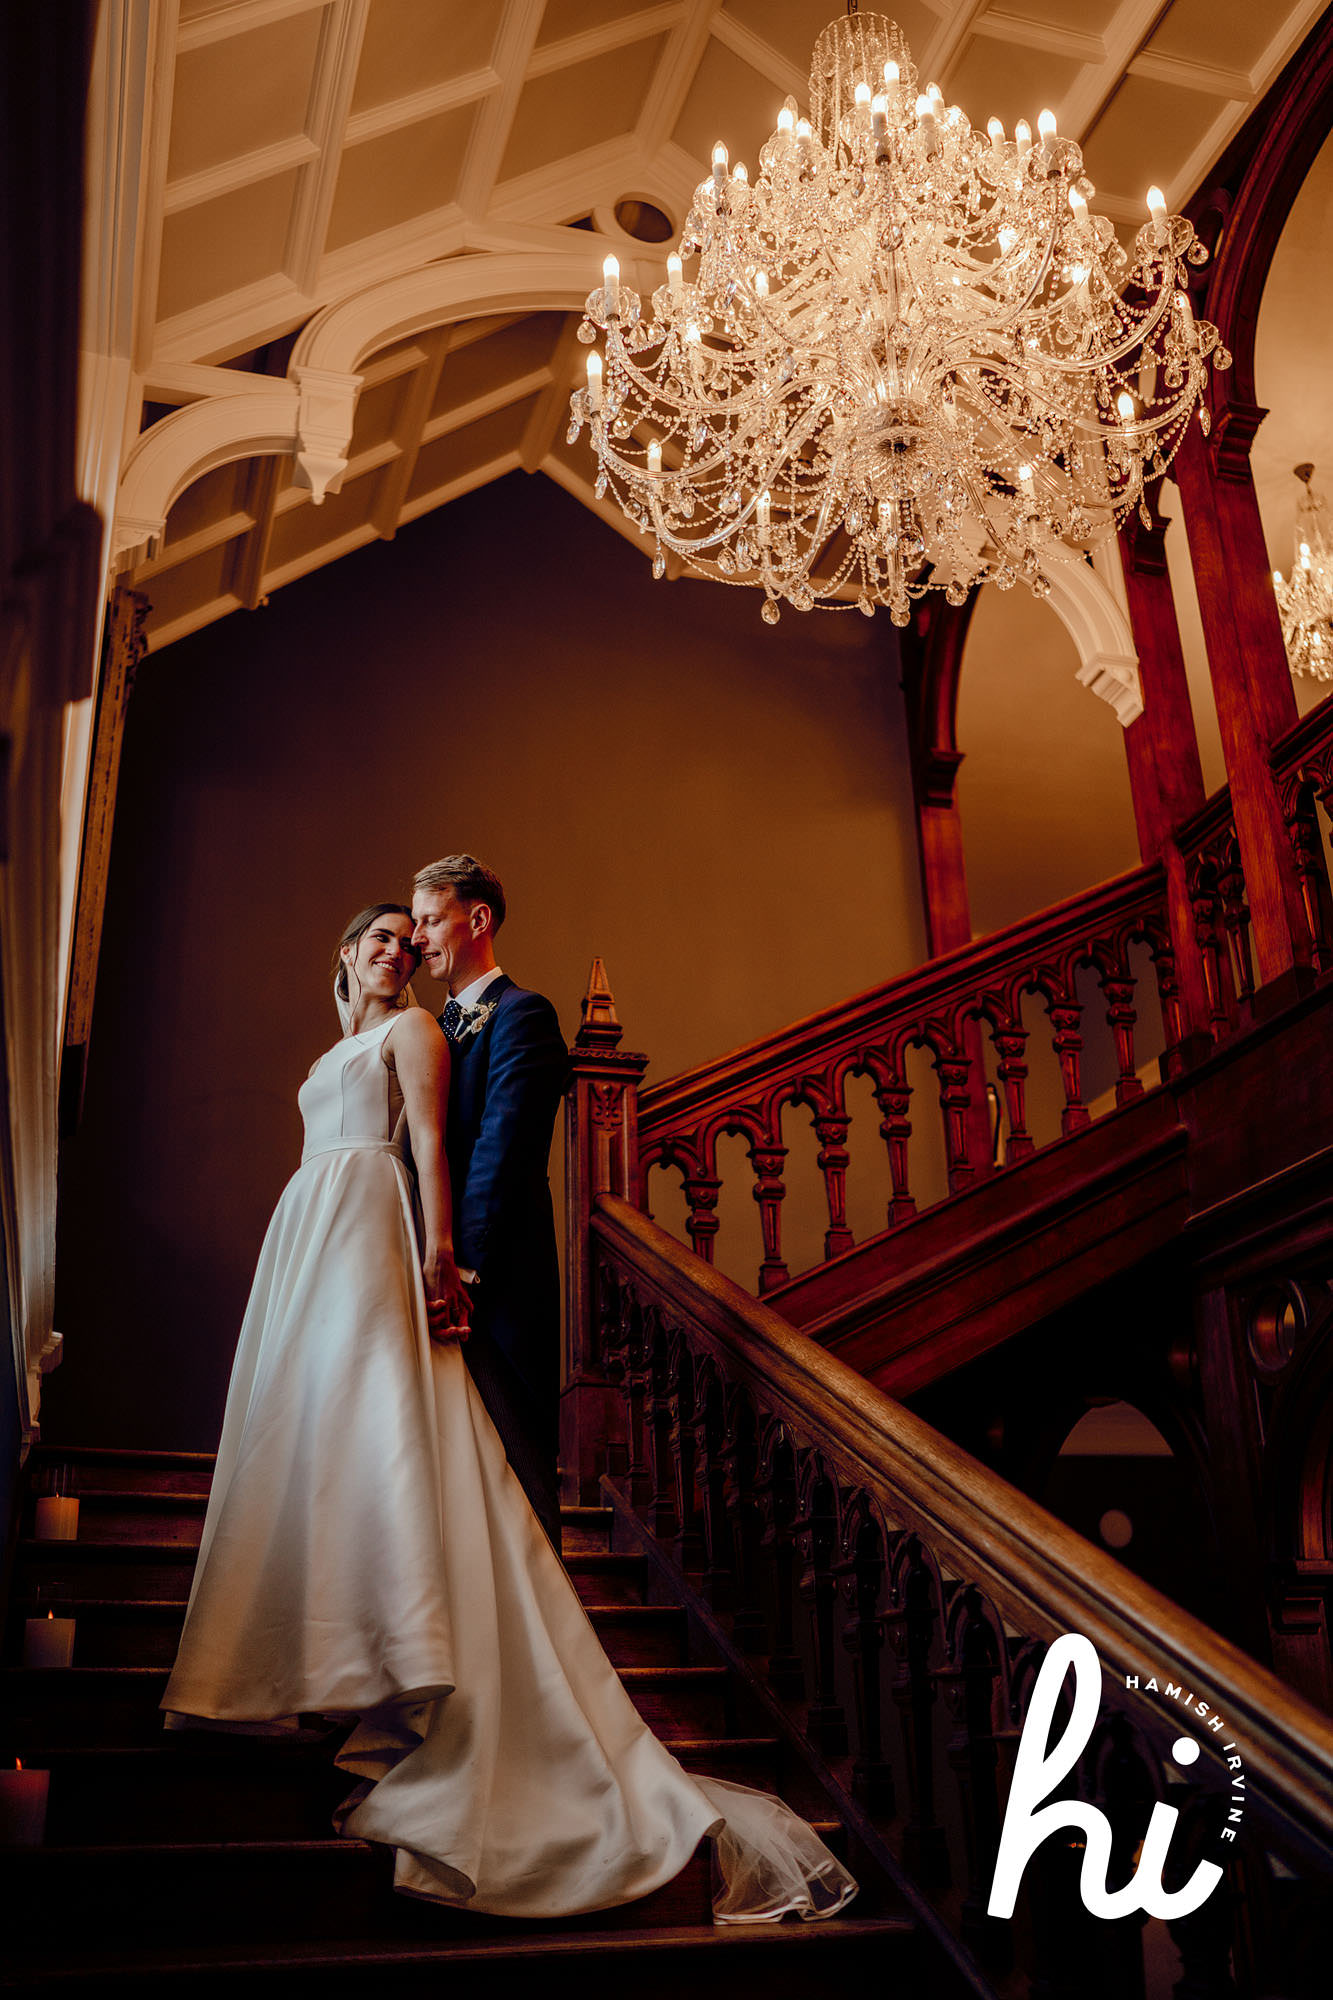 thicket priory stair case Weddings at Thicket Priory photography Hamish Irvine